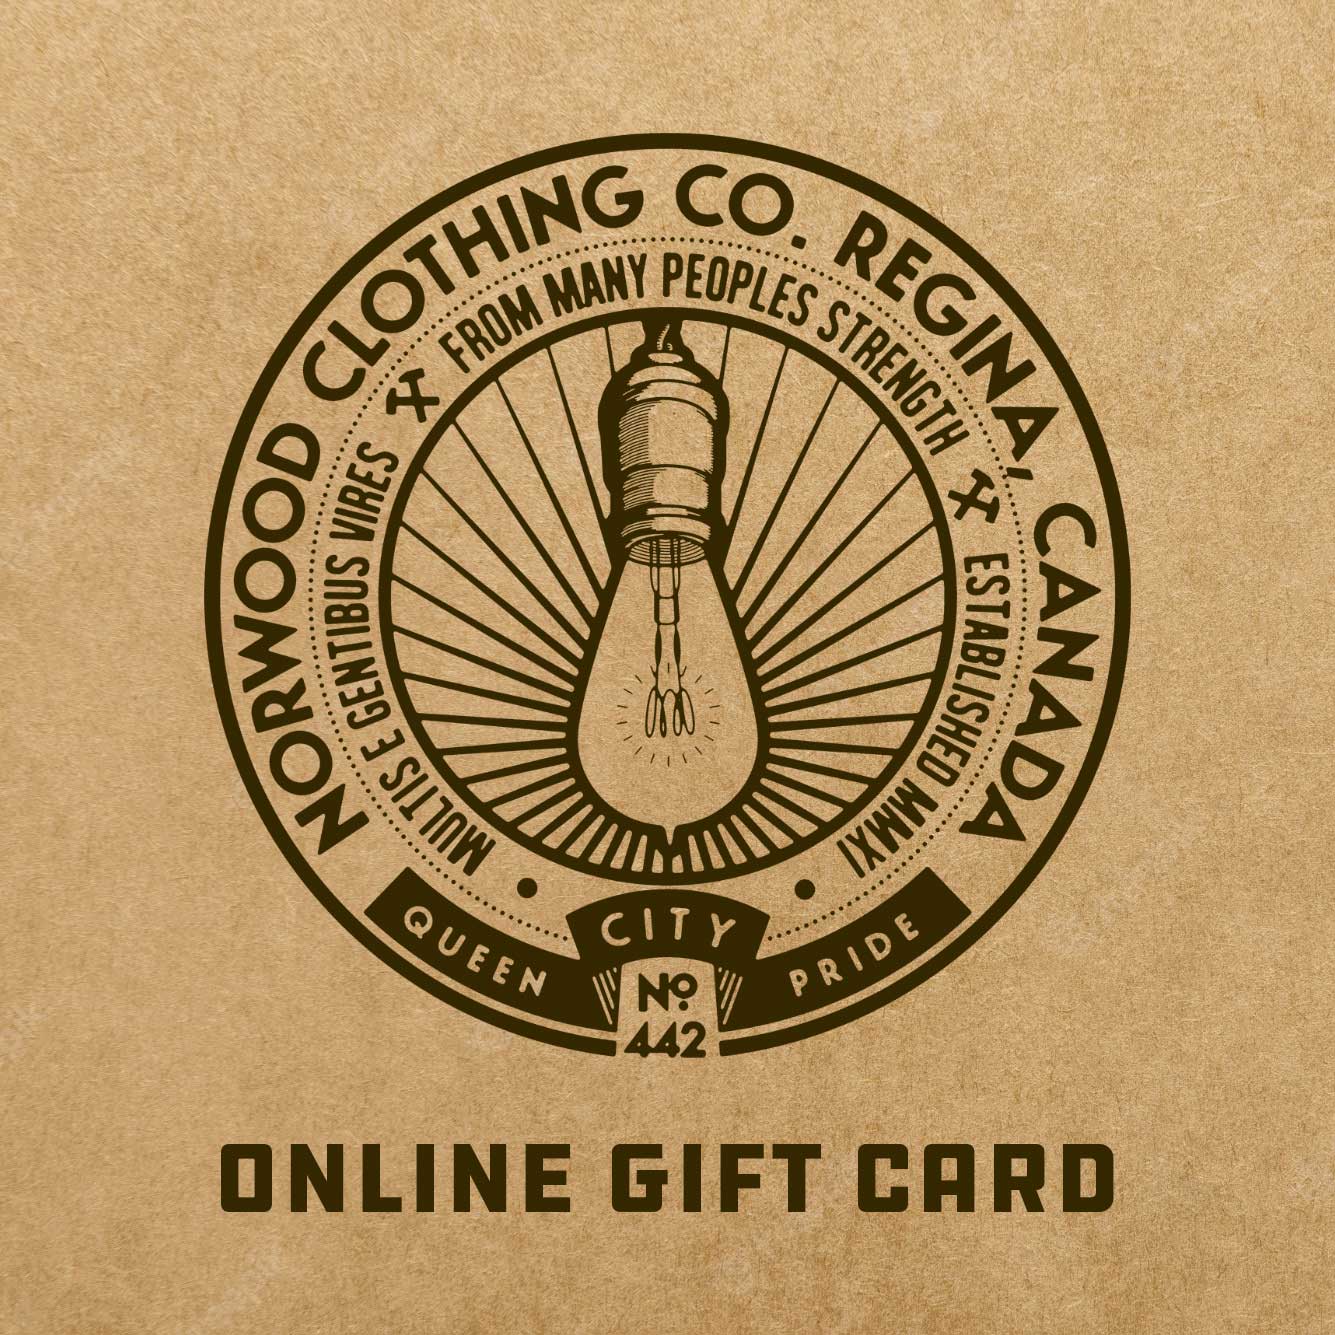 Online gift card – Norwood